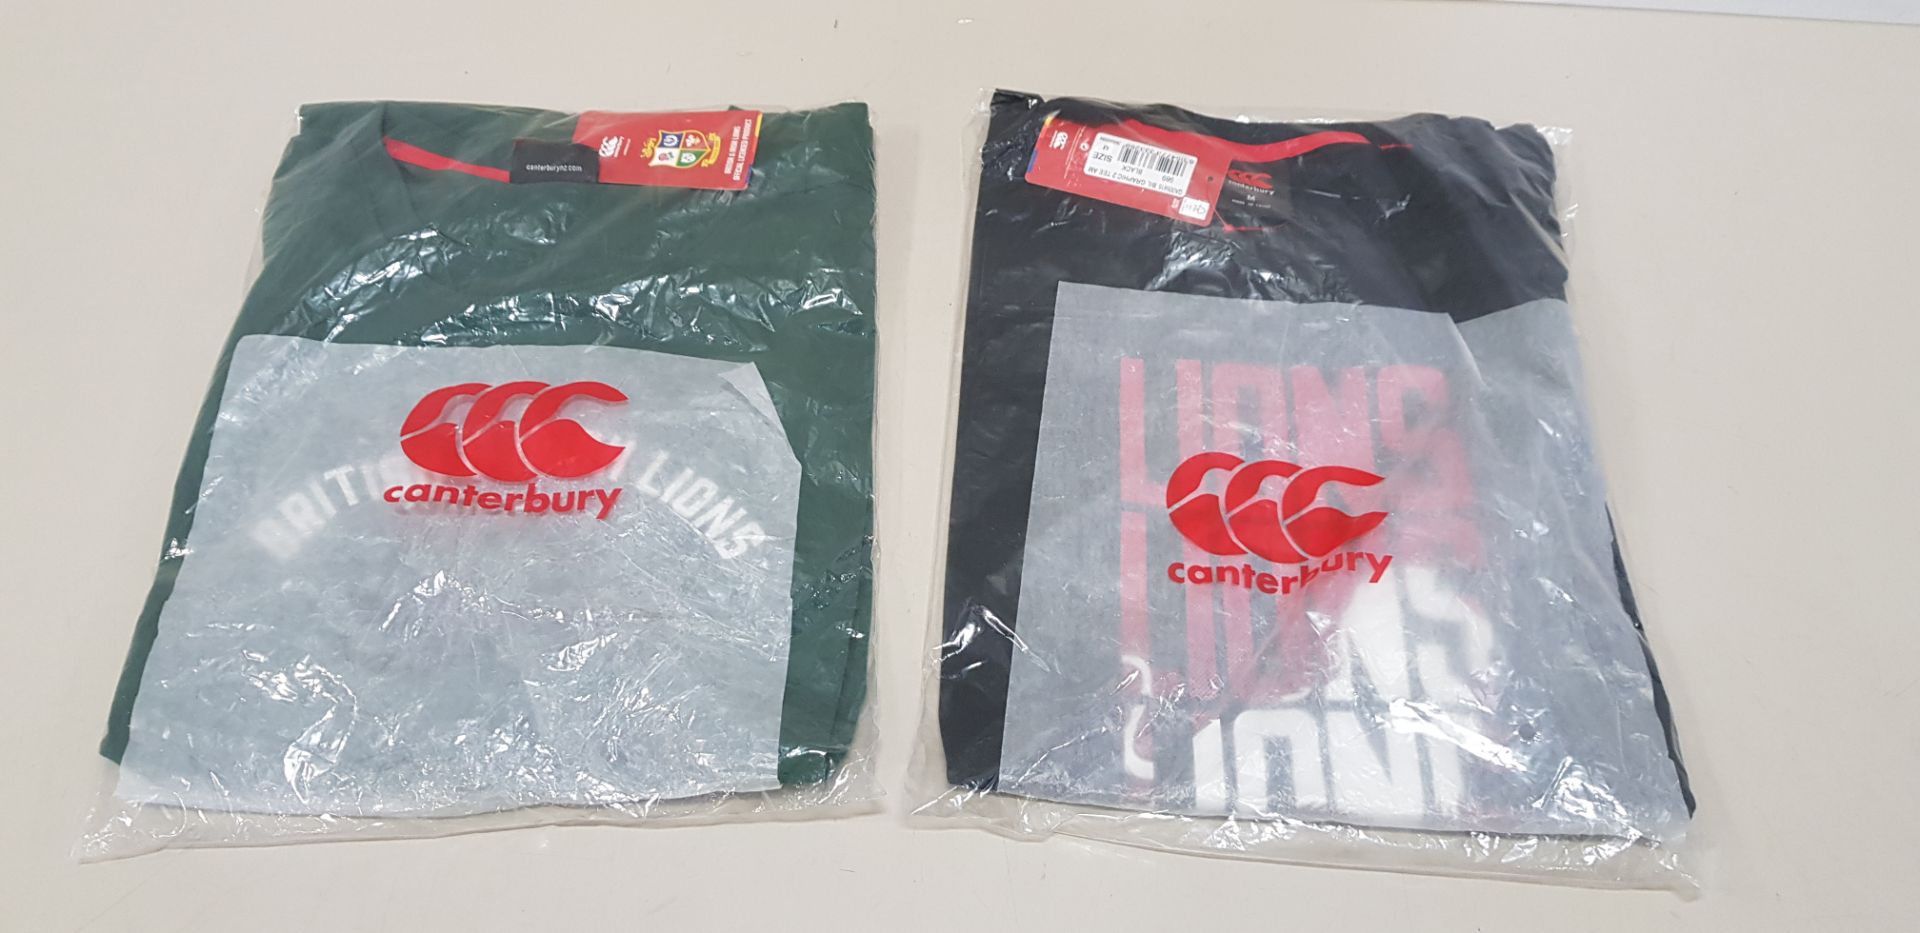 26 X BRAND NEW CANTERBURY T-SHIRTS (6 X GREEN (XL) AND 20 X BLACK (M)) - IN 2 BAGS